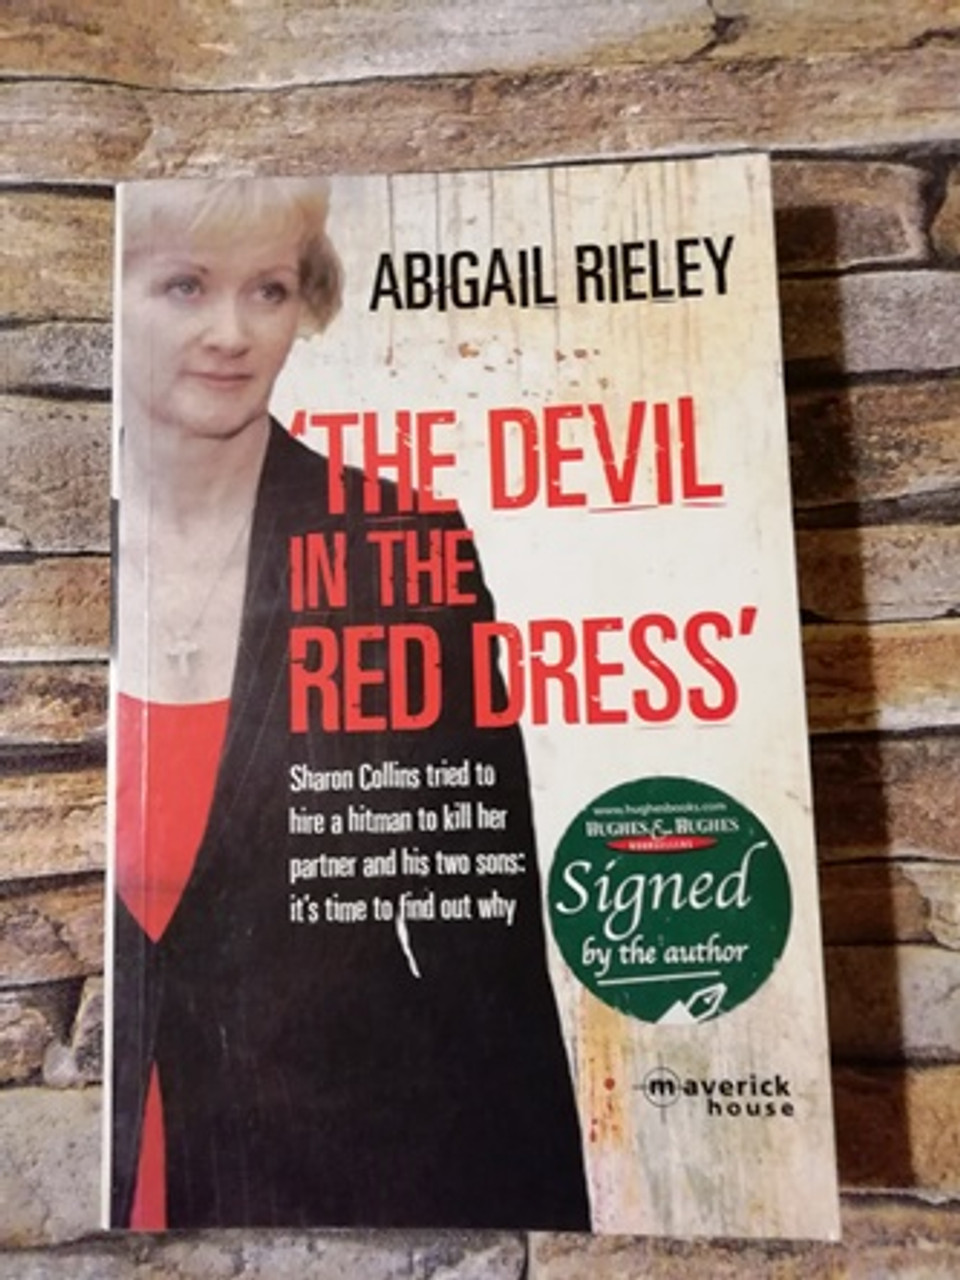 Abigail Rieley / The Devil in the Red Dress (Signed by the Author) (Paperback)